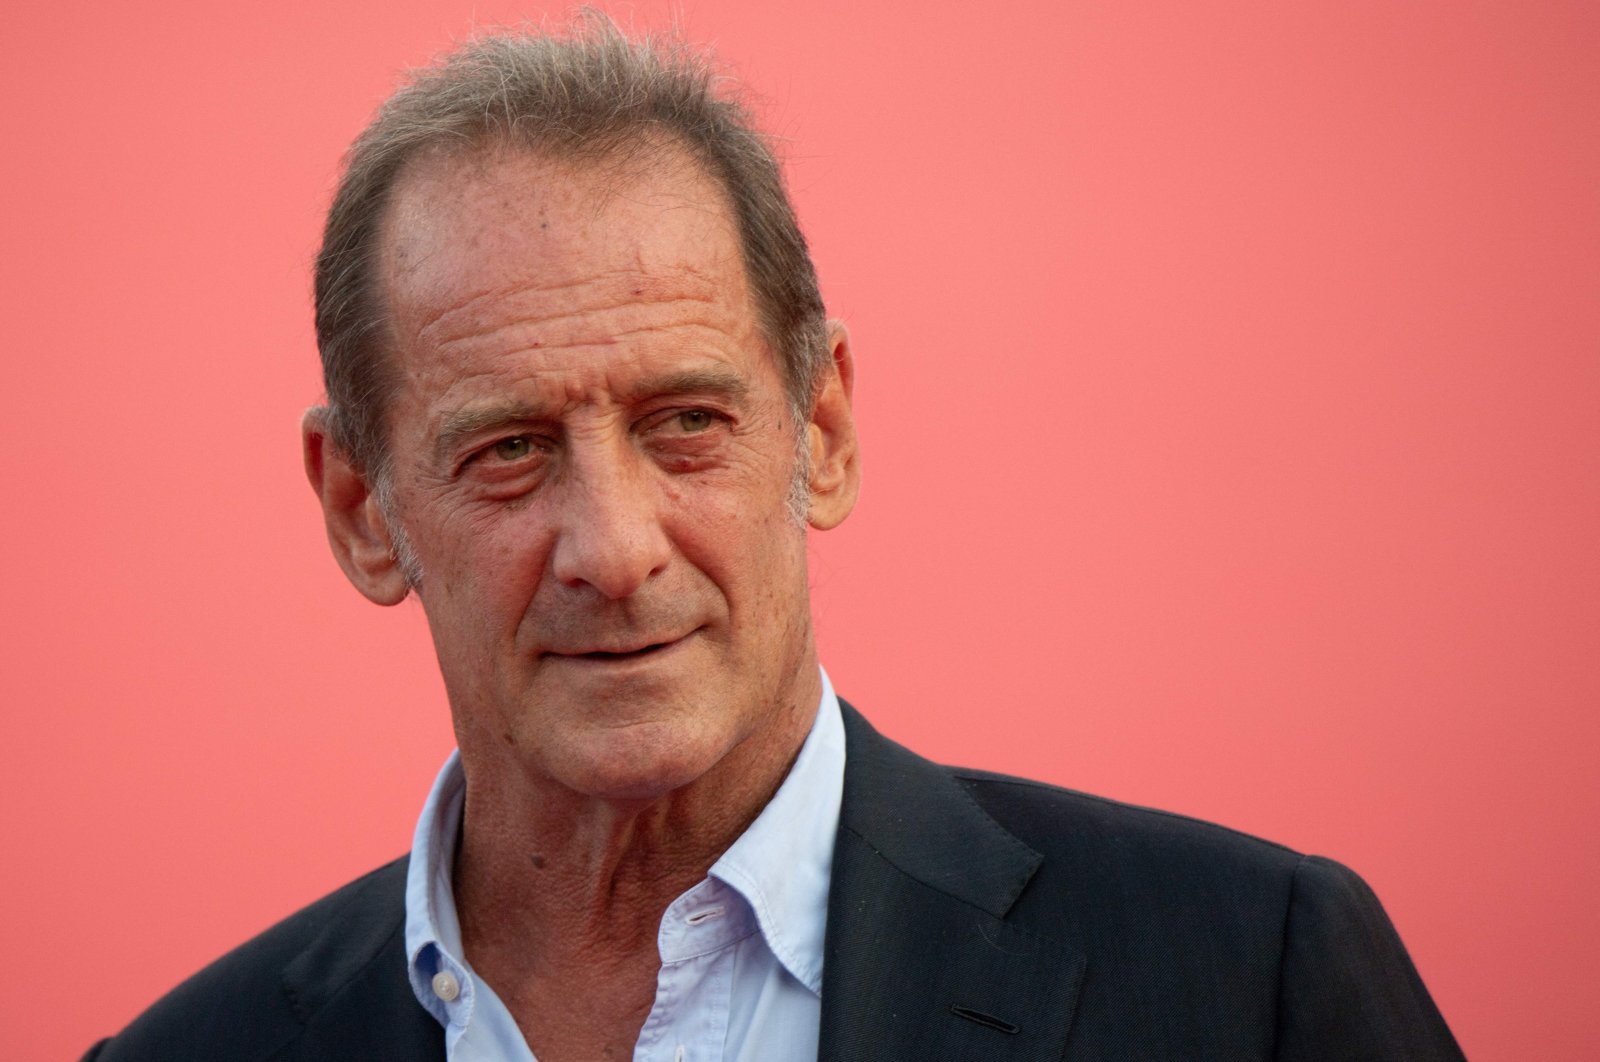 French actor Vincent Lindon poses as he arrives on the red carpet during the 47th Deauville American Film Festival in Deauville, western France, Sept. 4, 2021. (AFP)